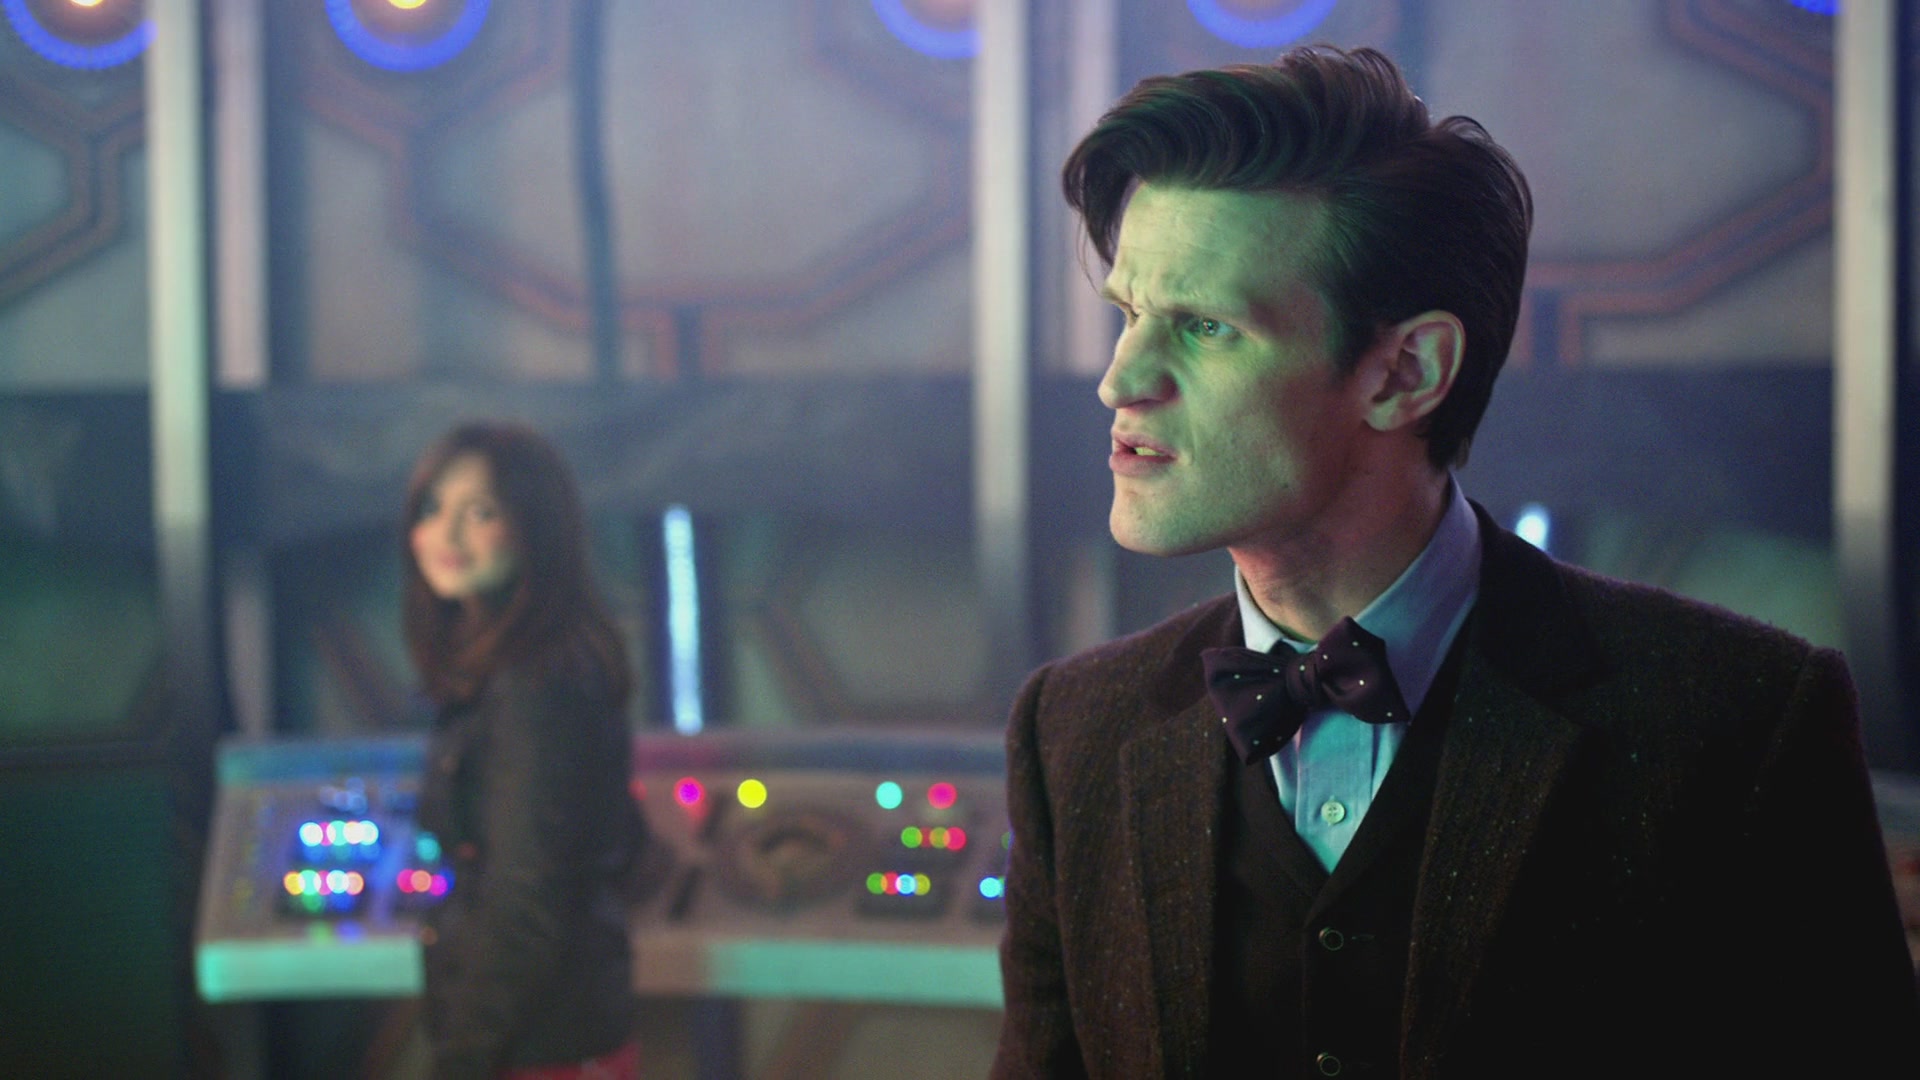 DayOfTheDoctor-Caps-0899.jpg